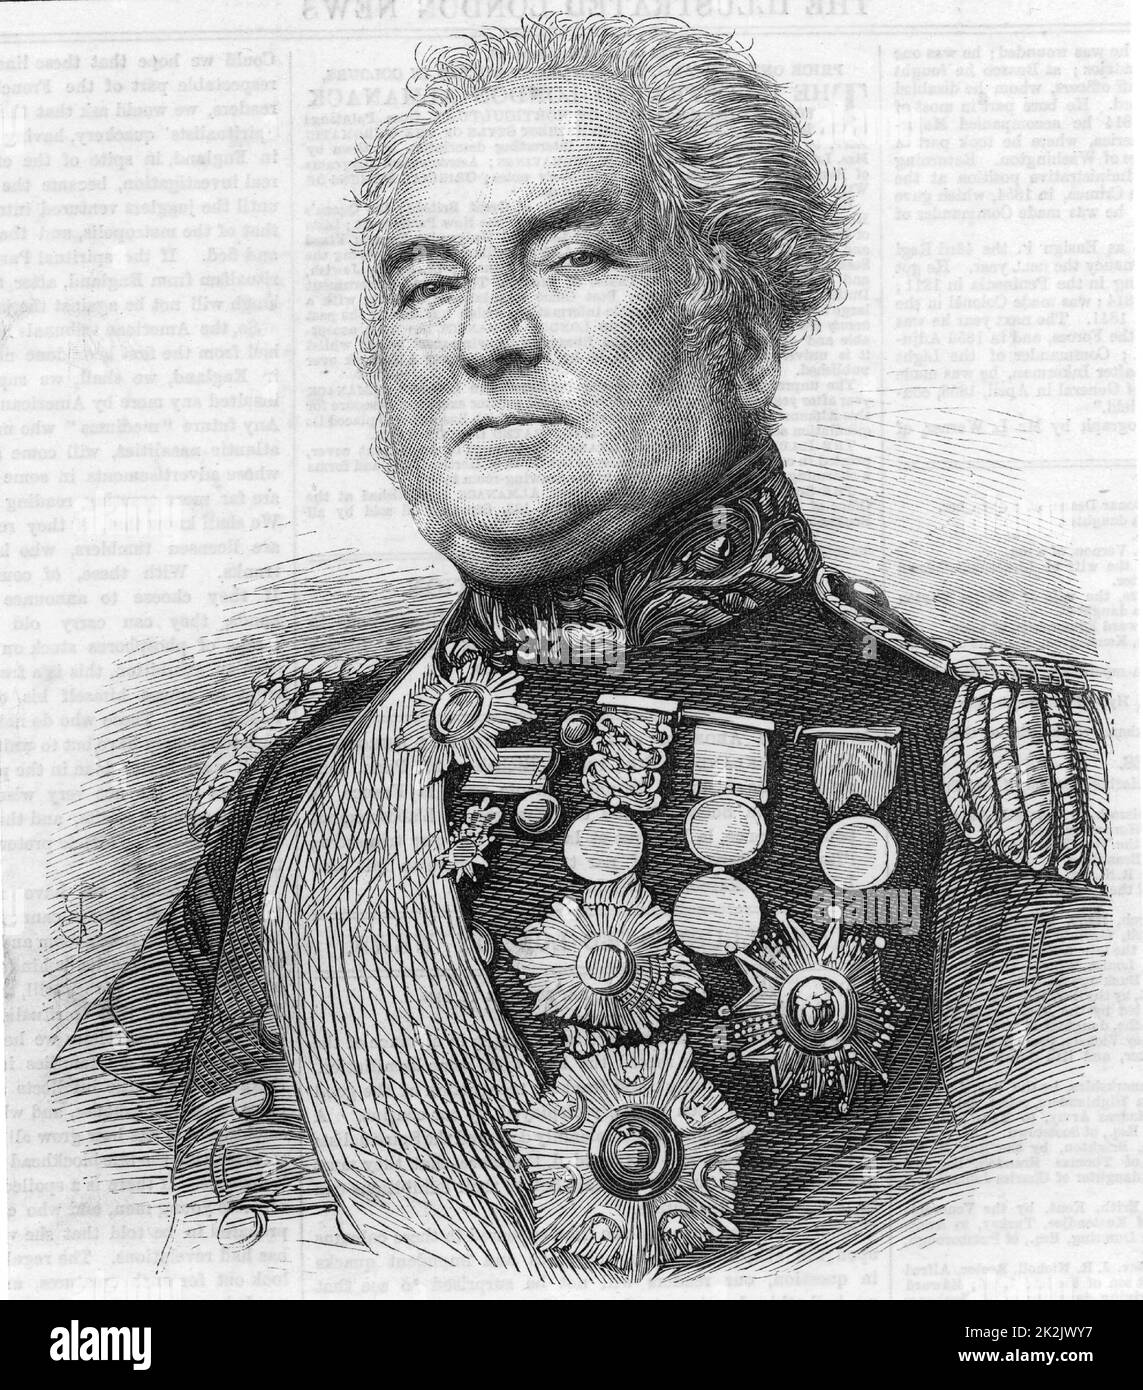 Lieutenant General George Brown (1790-1865), British soldier. Fought in the Peninsular campaign in the Napoleonic Wars. In the Crimean (Russo-Turkish) War 1853-1856. Commanded the Light Division at the Battle of Alma, 20 September 1854, when his horse was killed under him. A bully and an over strict disciplinarian, it was said 'the old wretch is more hated than any man ever was'. From 'The Illustrated London News' (London, 1865). Engraving. Stock Photo